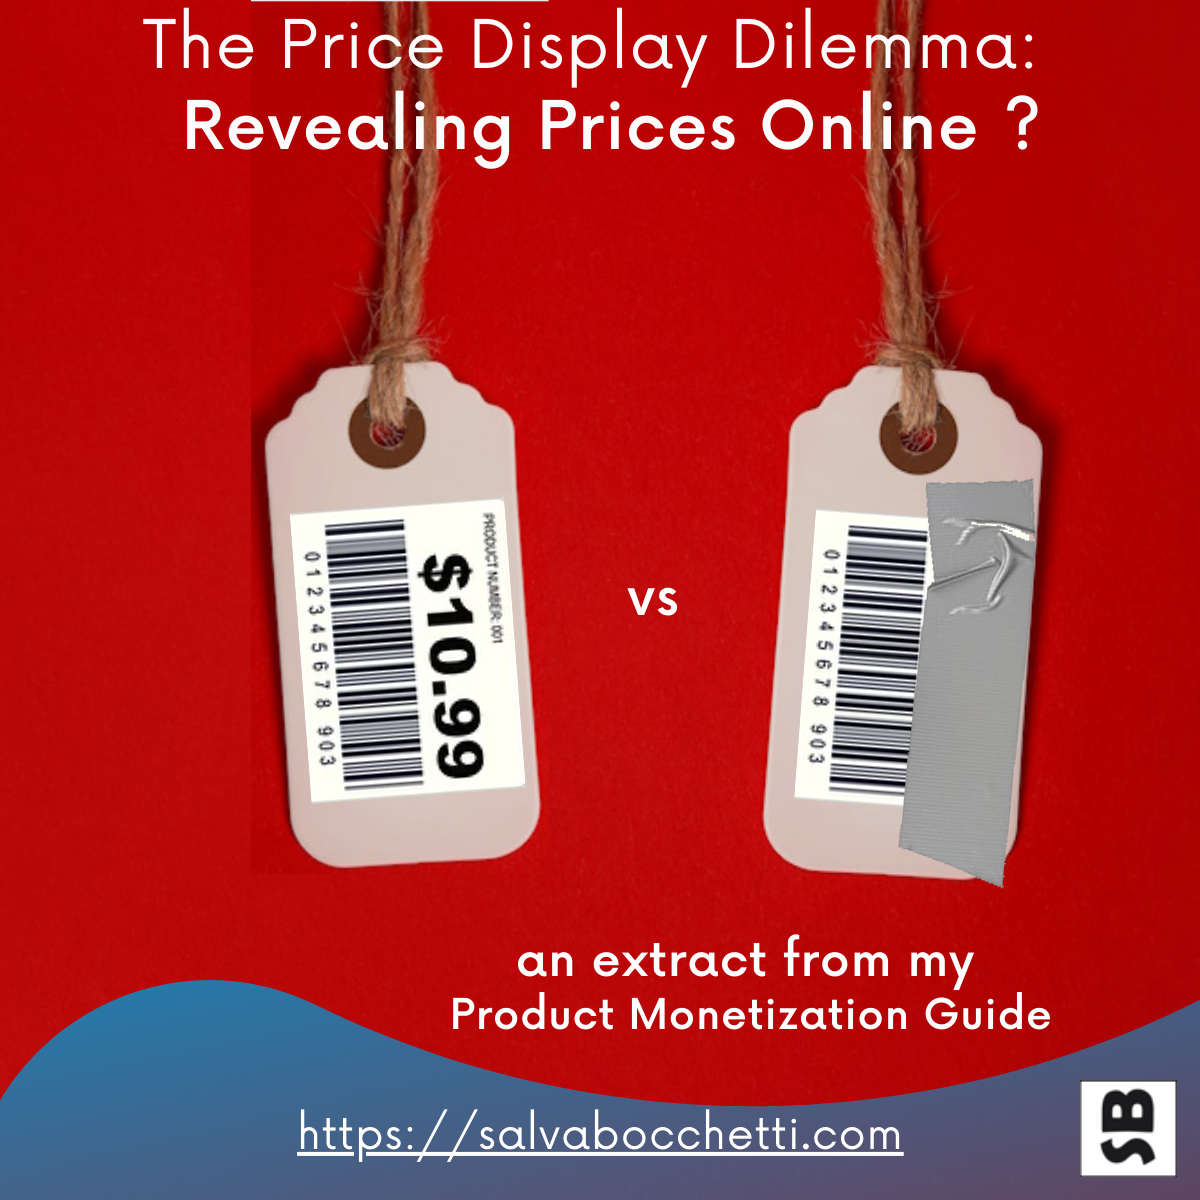 The Price Display Dilemma: Unveiling the Pros and Cons of Revealing Prices Online